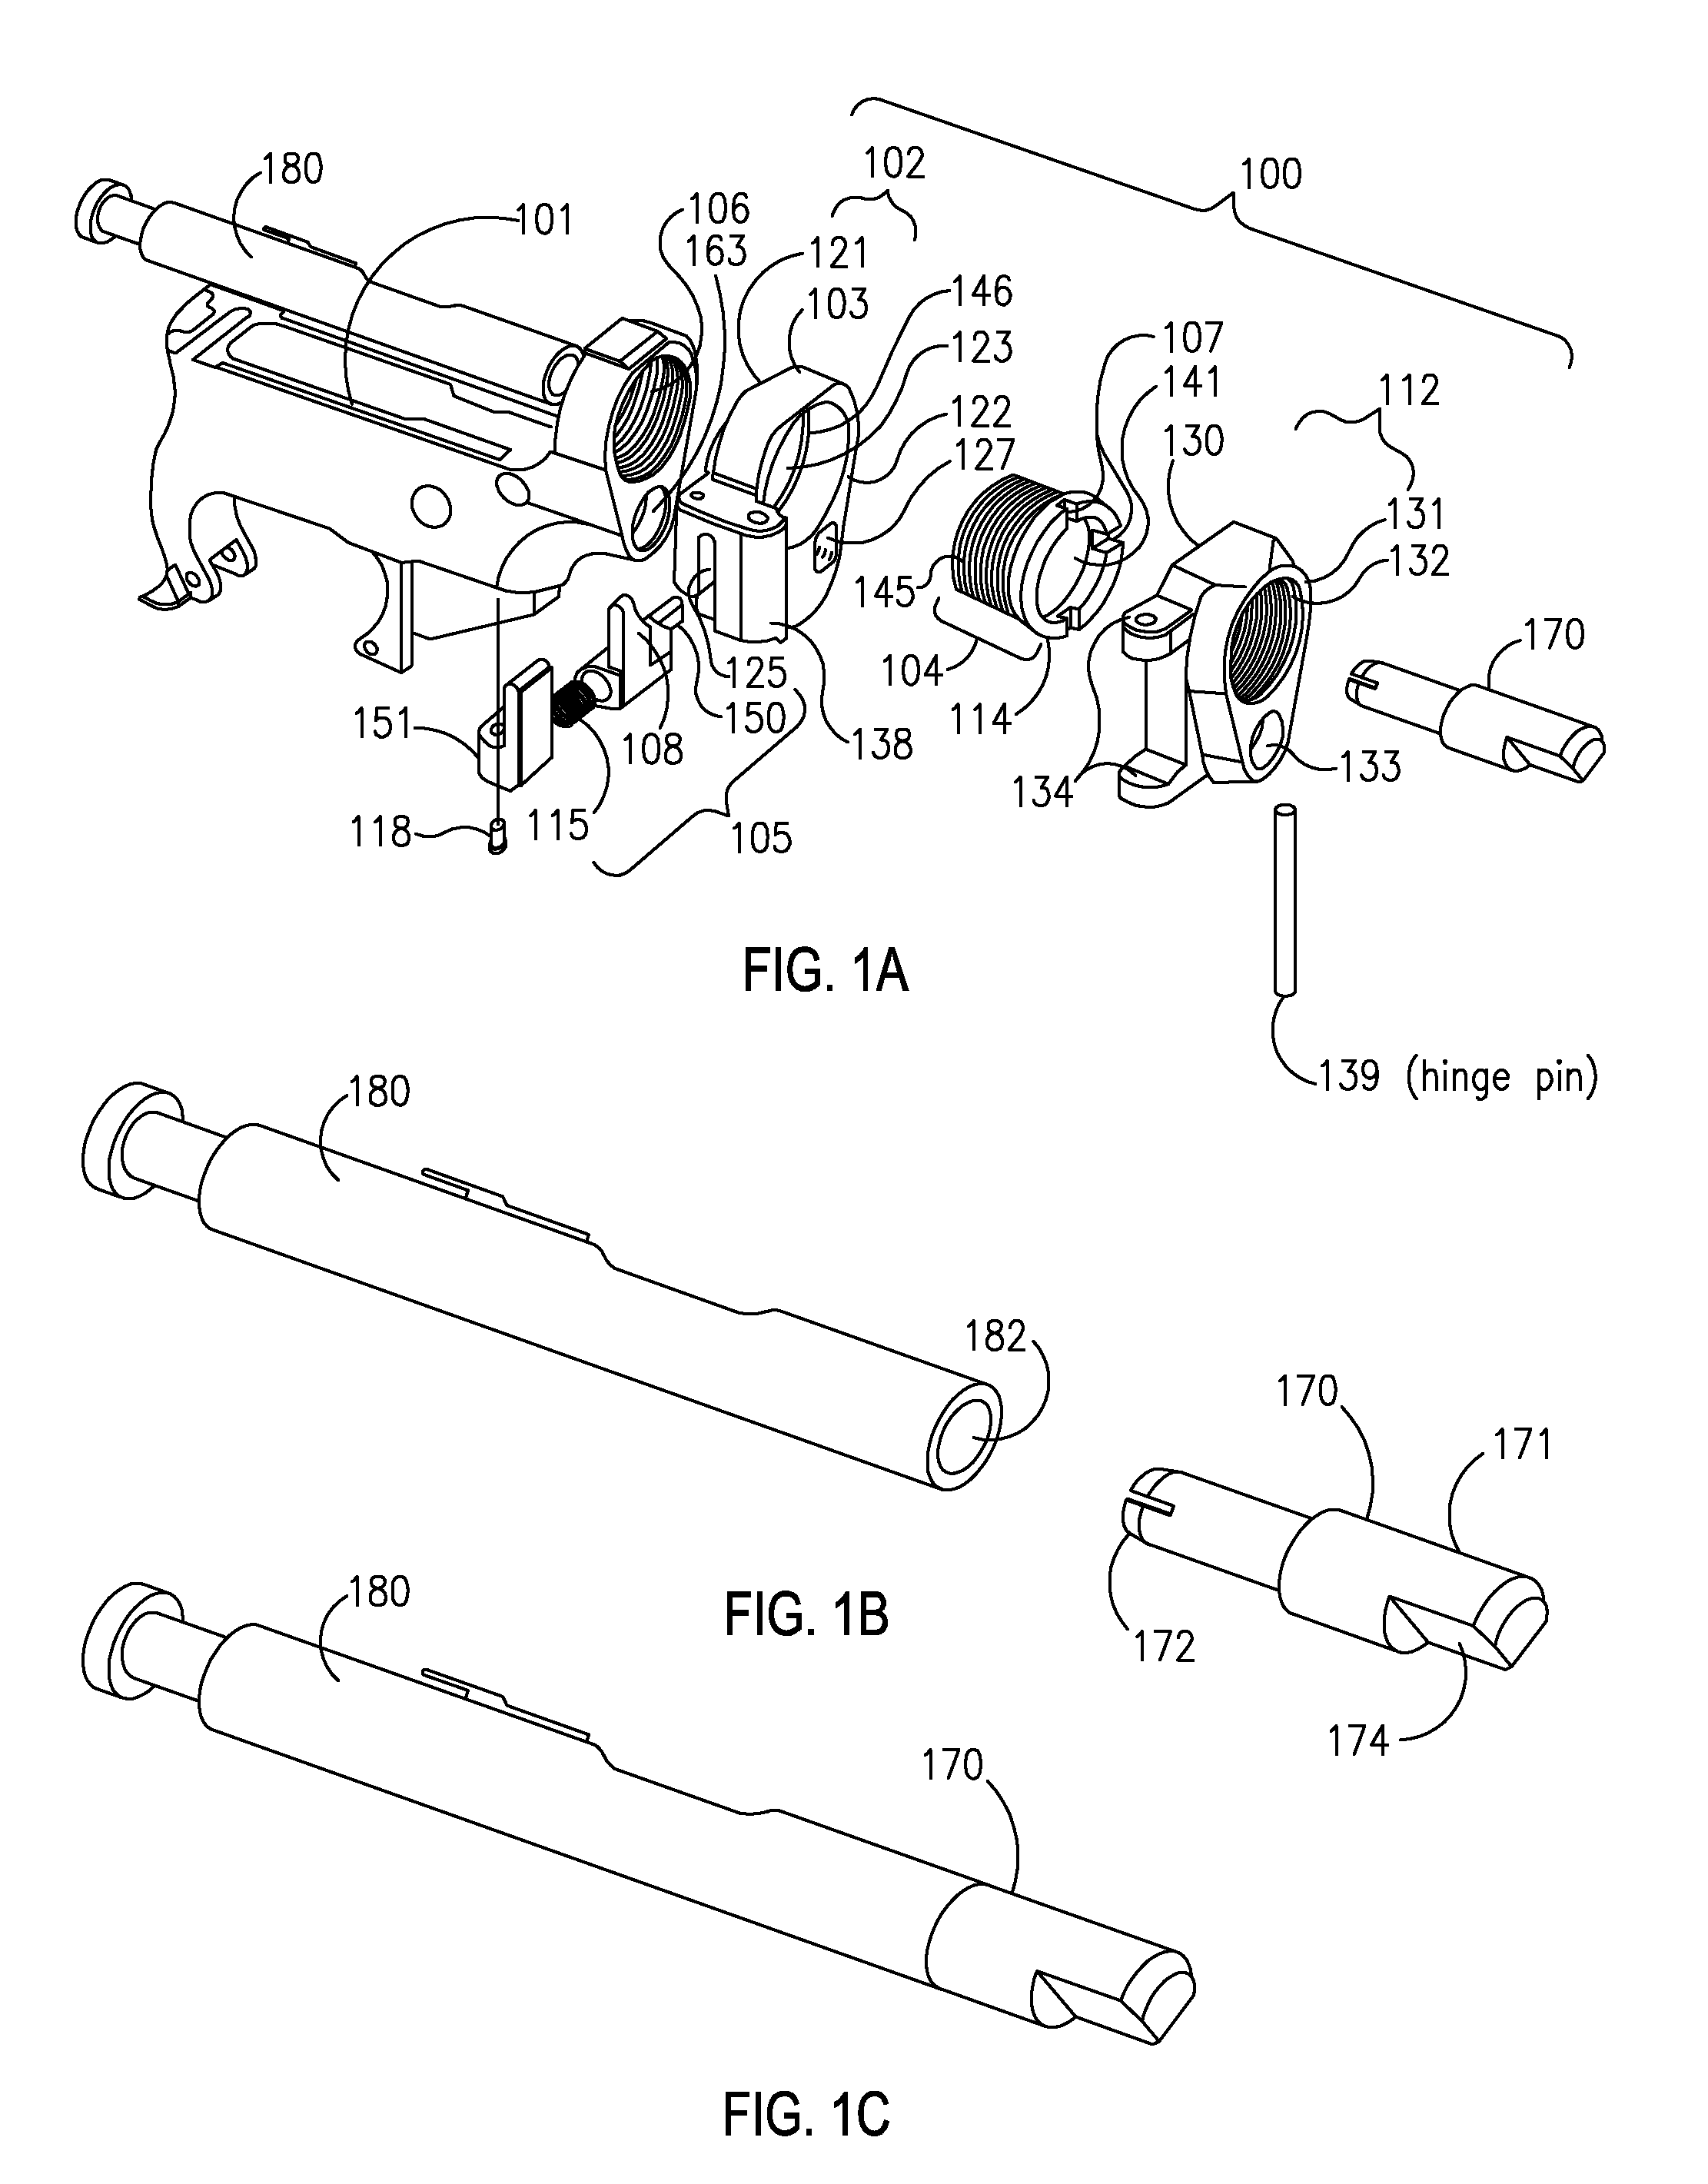 Folding stock adaptor for military-style assault rifles and a method for its use